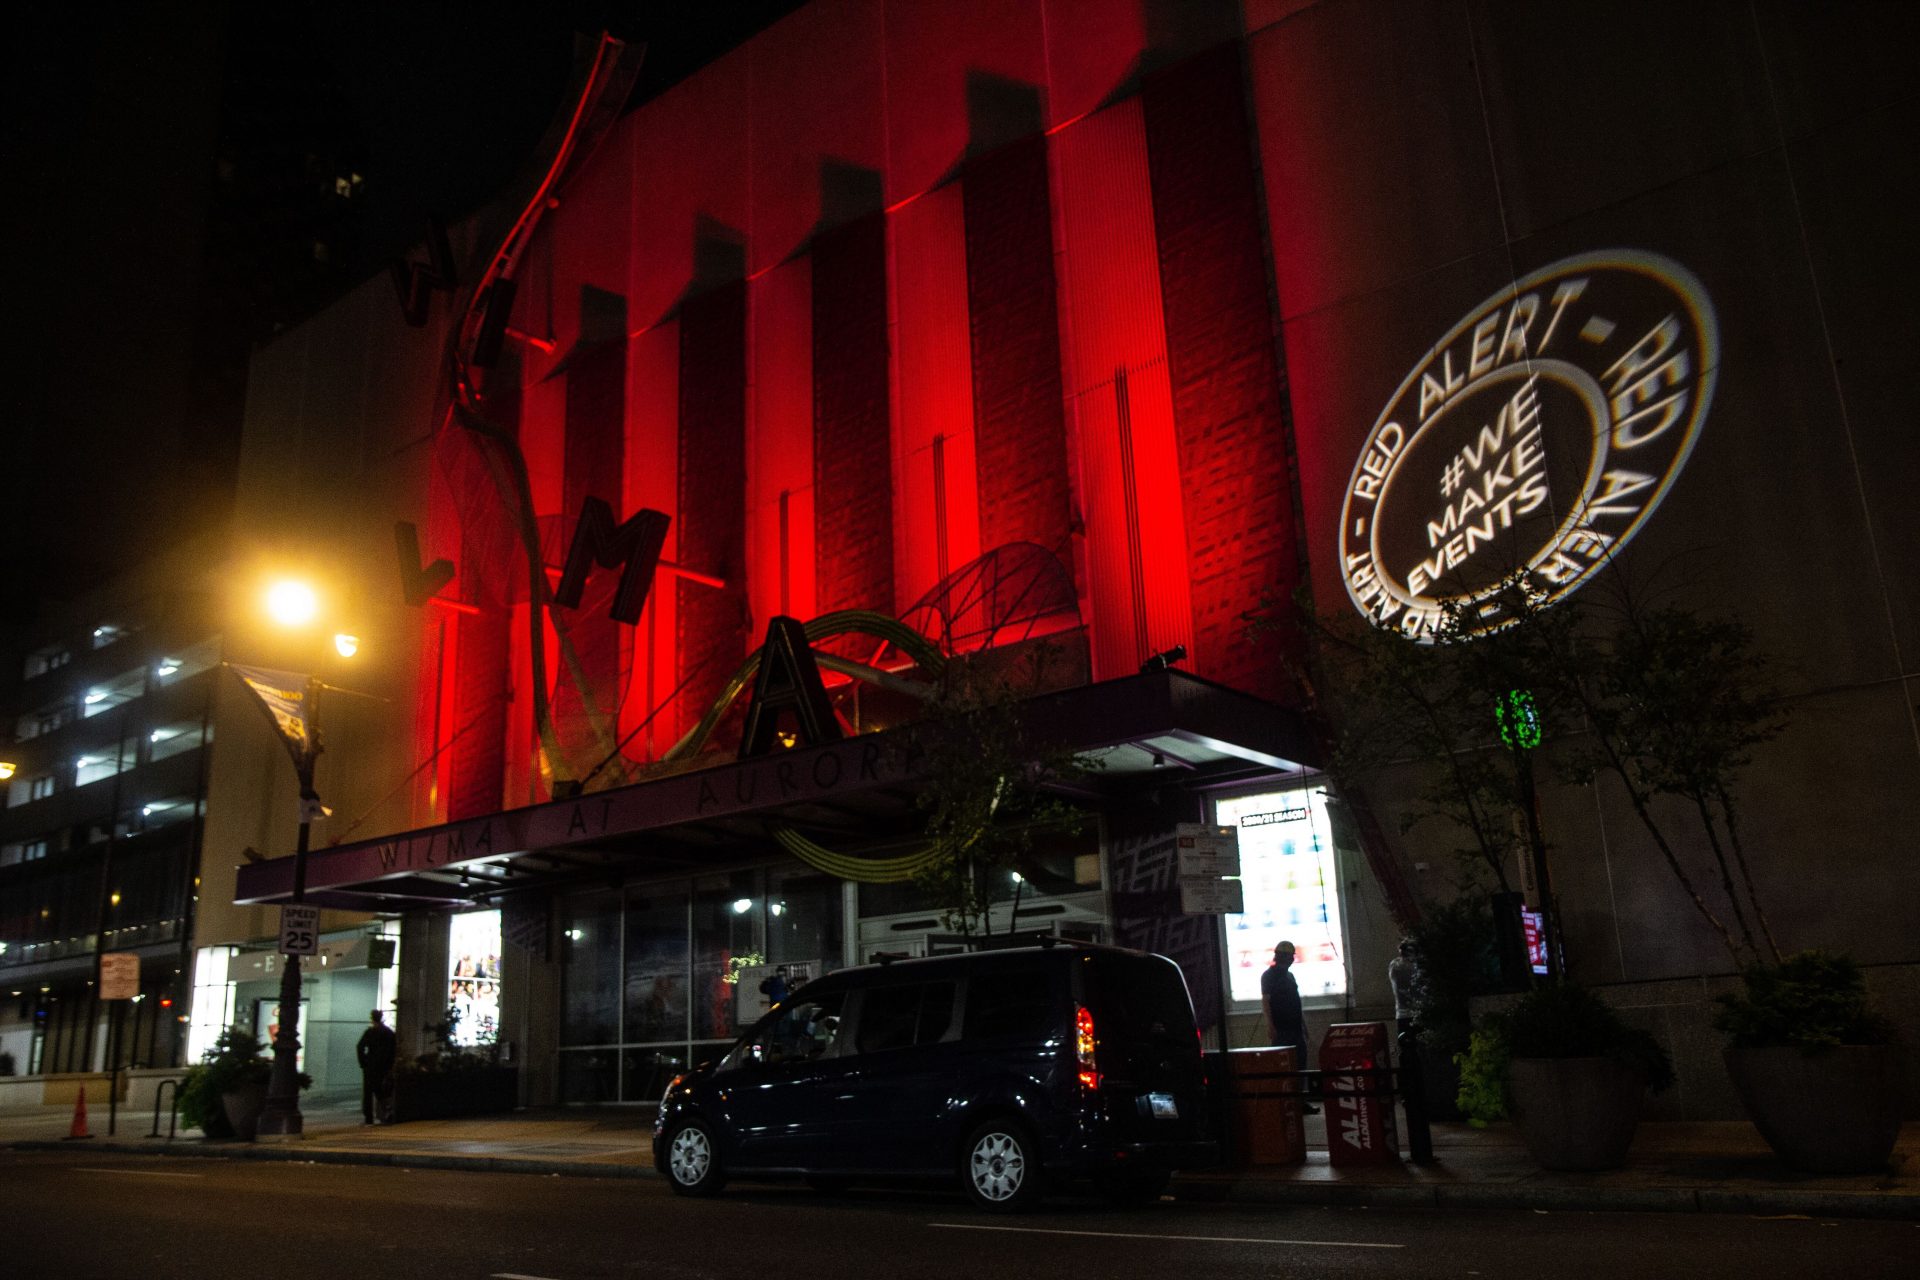 The Wilma Theater in Philadelphia lit up red for industry professionals out of work due to the pandemic.